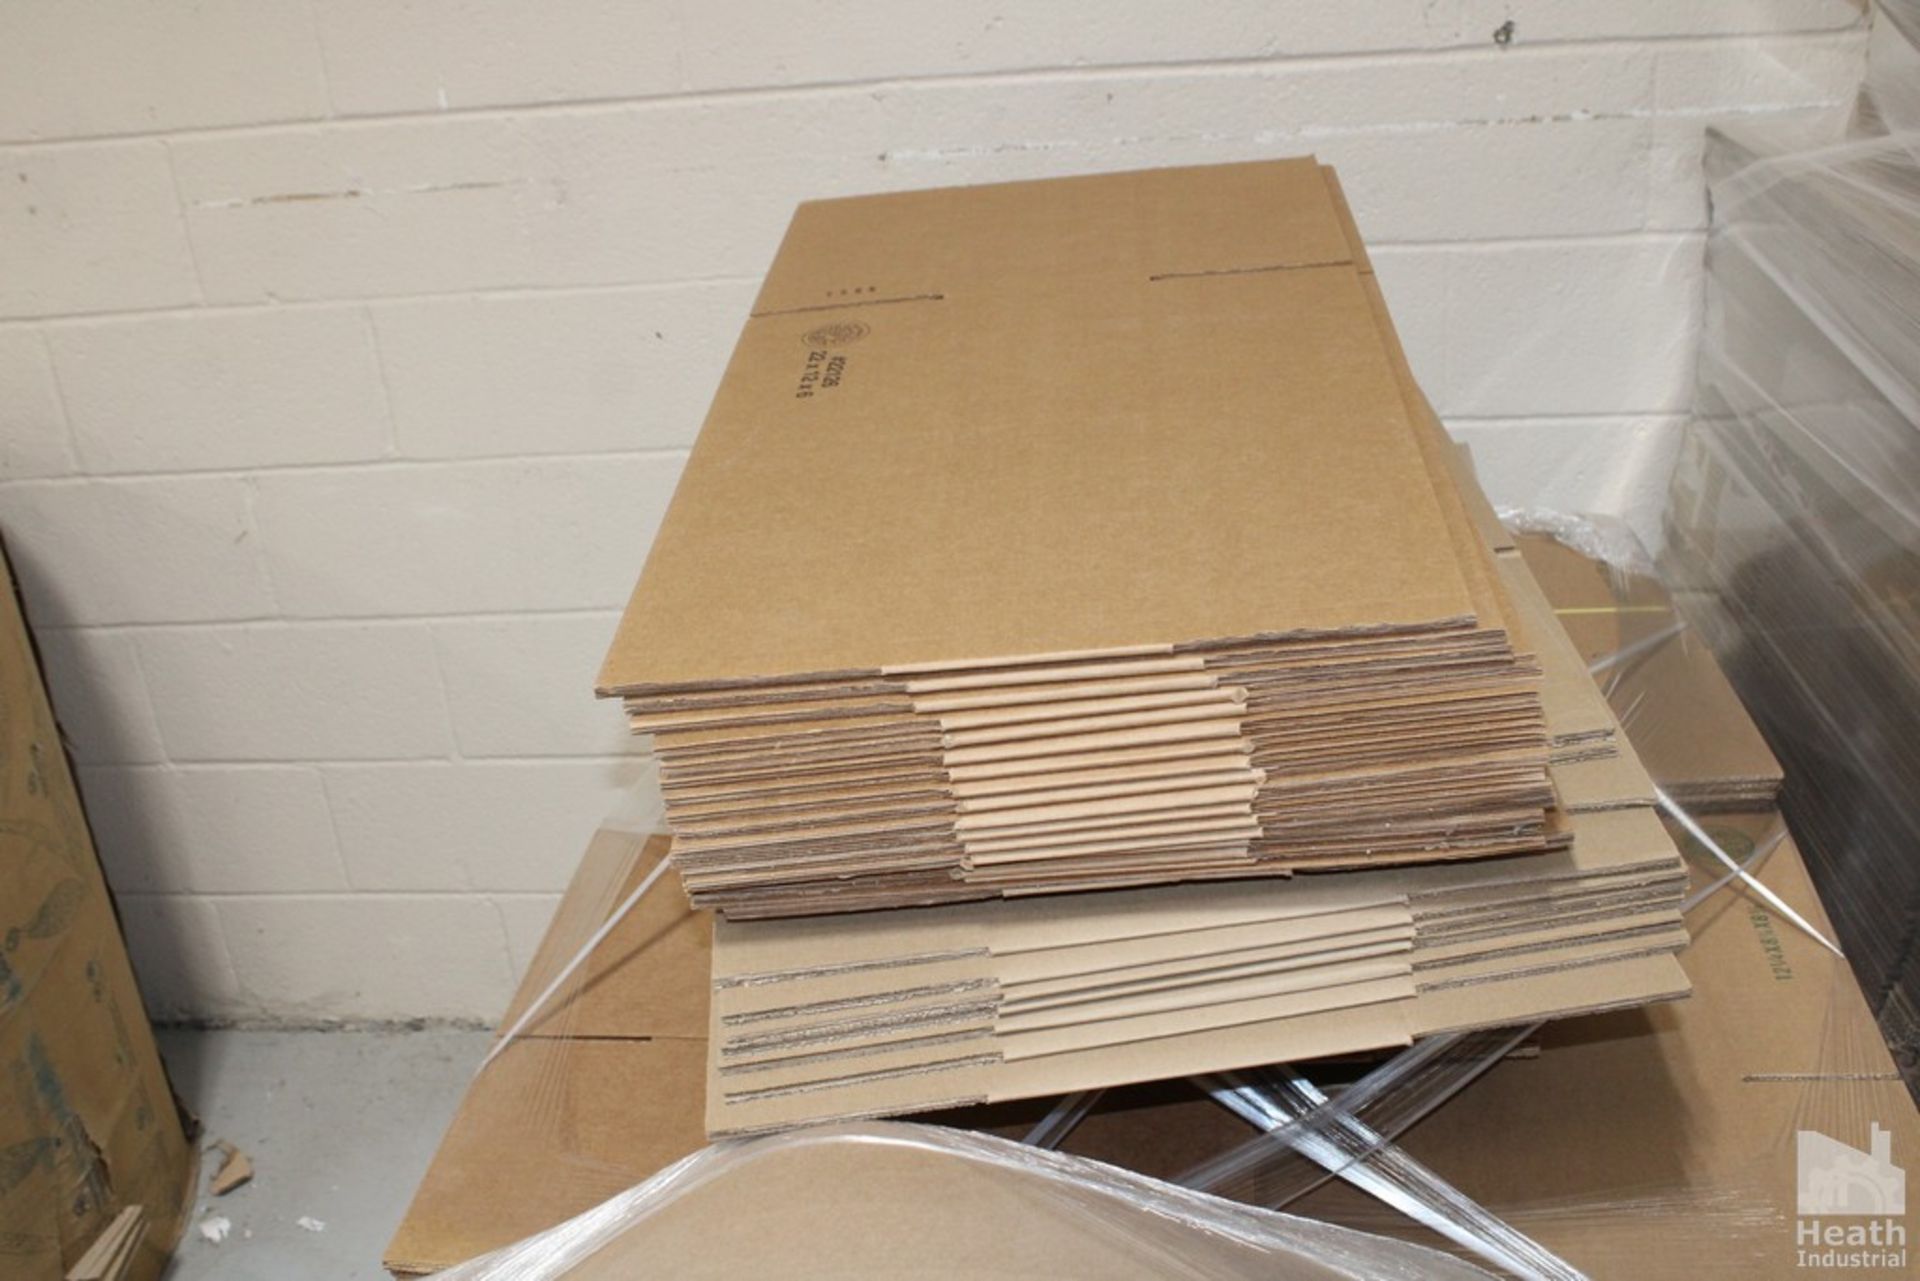 (4) SKIDS ASSORTED CARDBOARD SHIPPING BOXES - Image 2 of 3